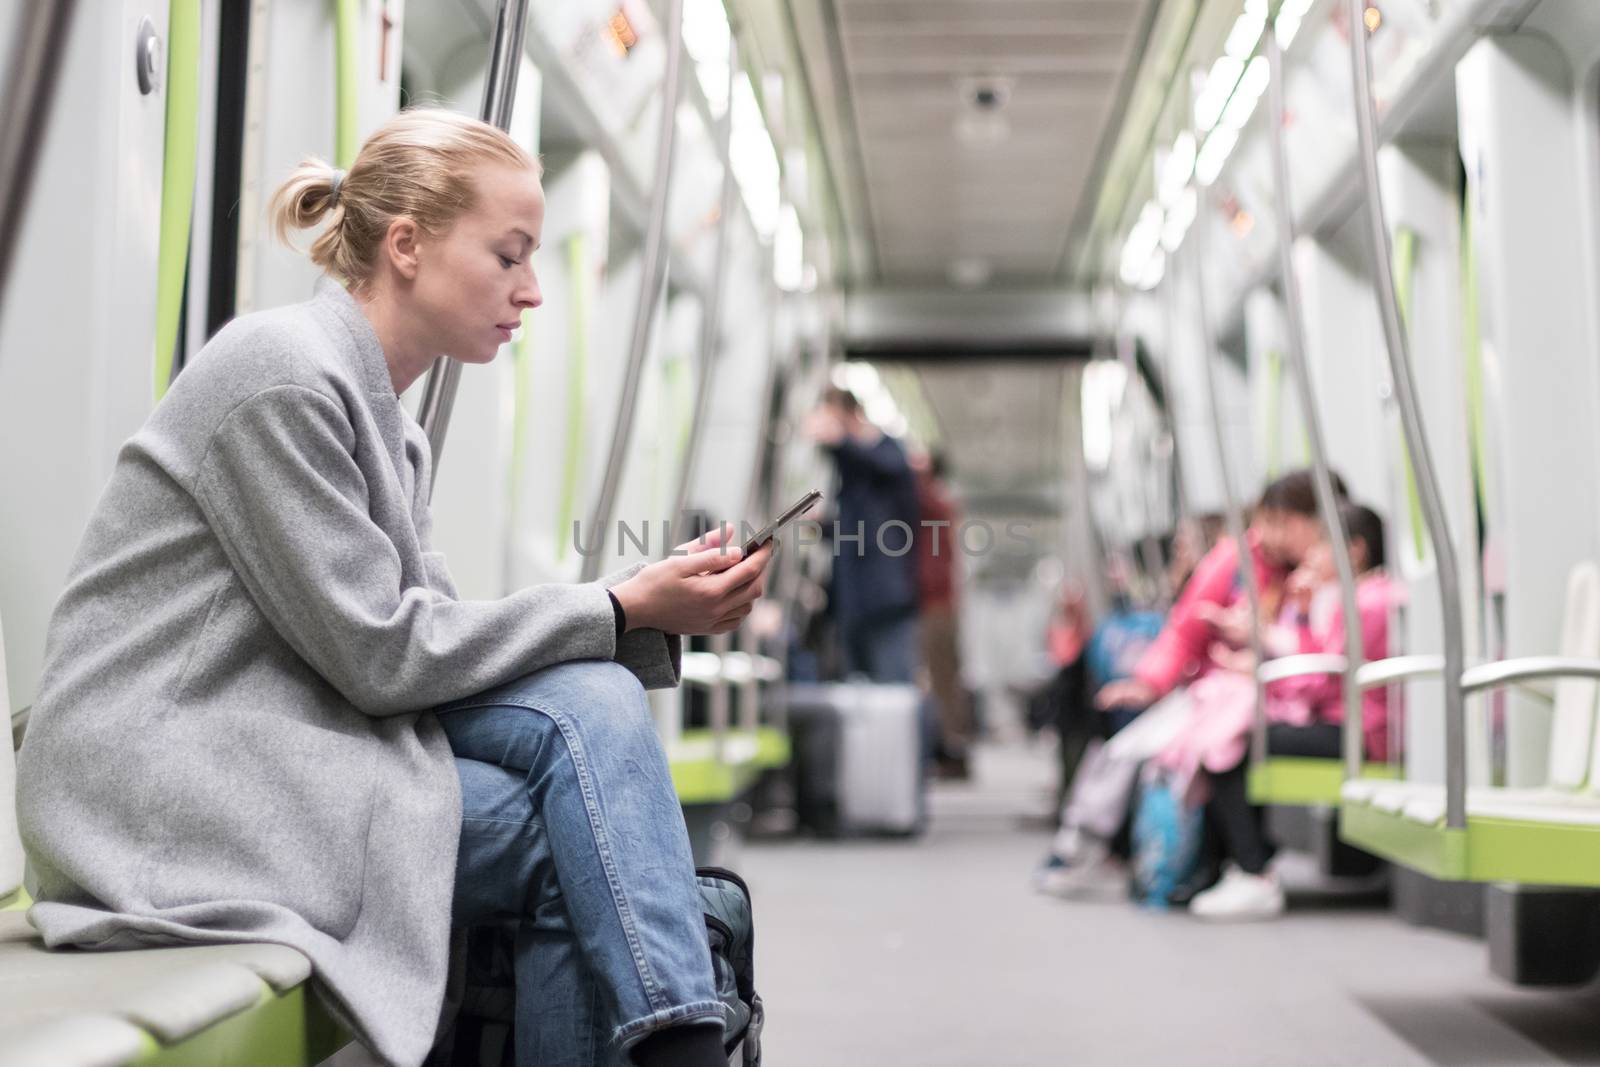 Portrait of lovely girl typing message on mobile phone in almost empty public subway train. Staying at home and social distancing recomented due to corona virus pandemic outbreak.